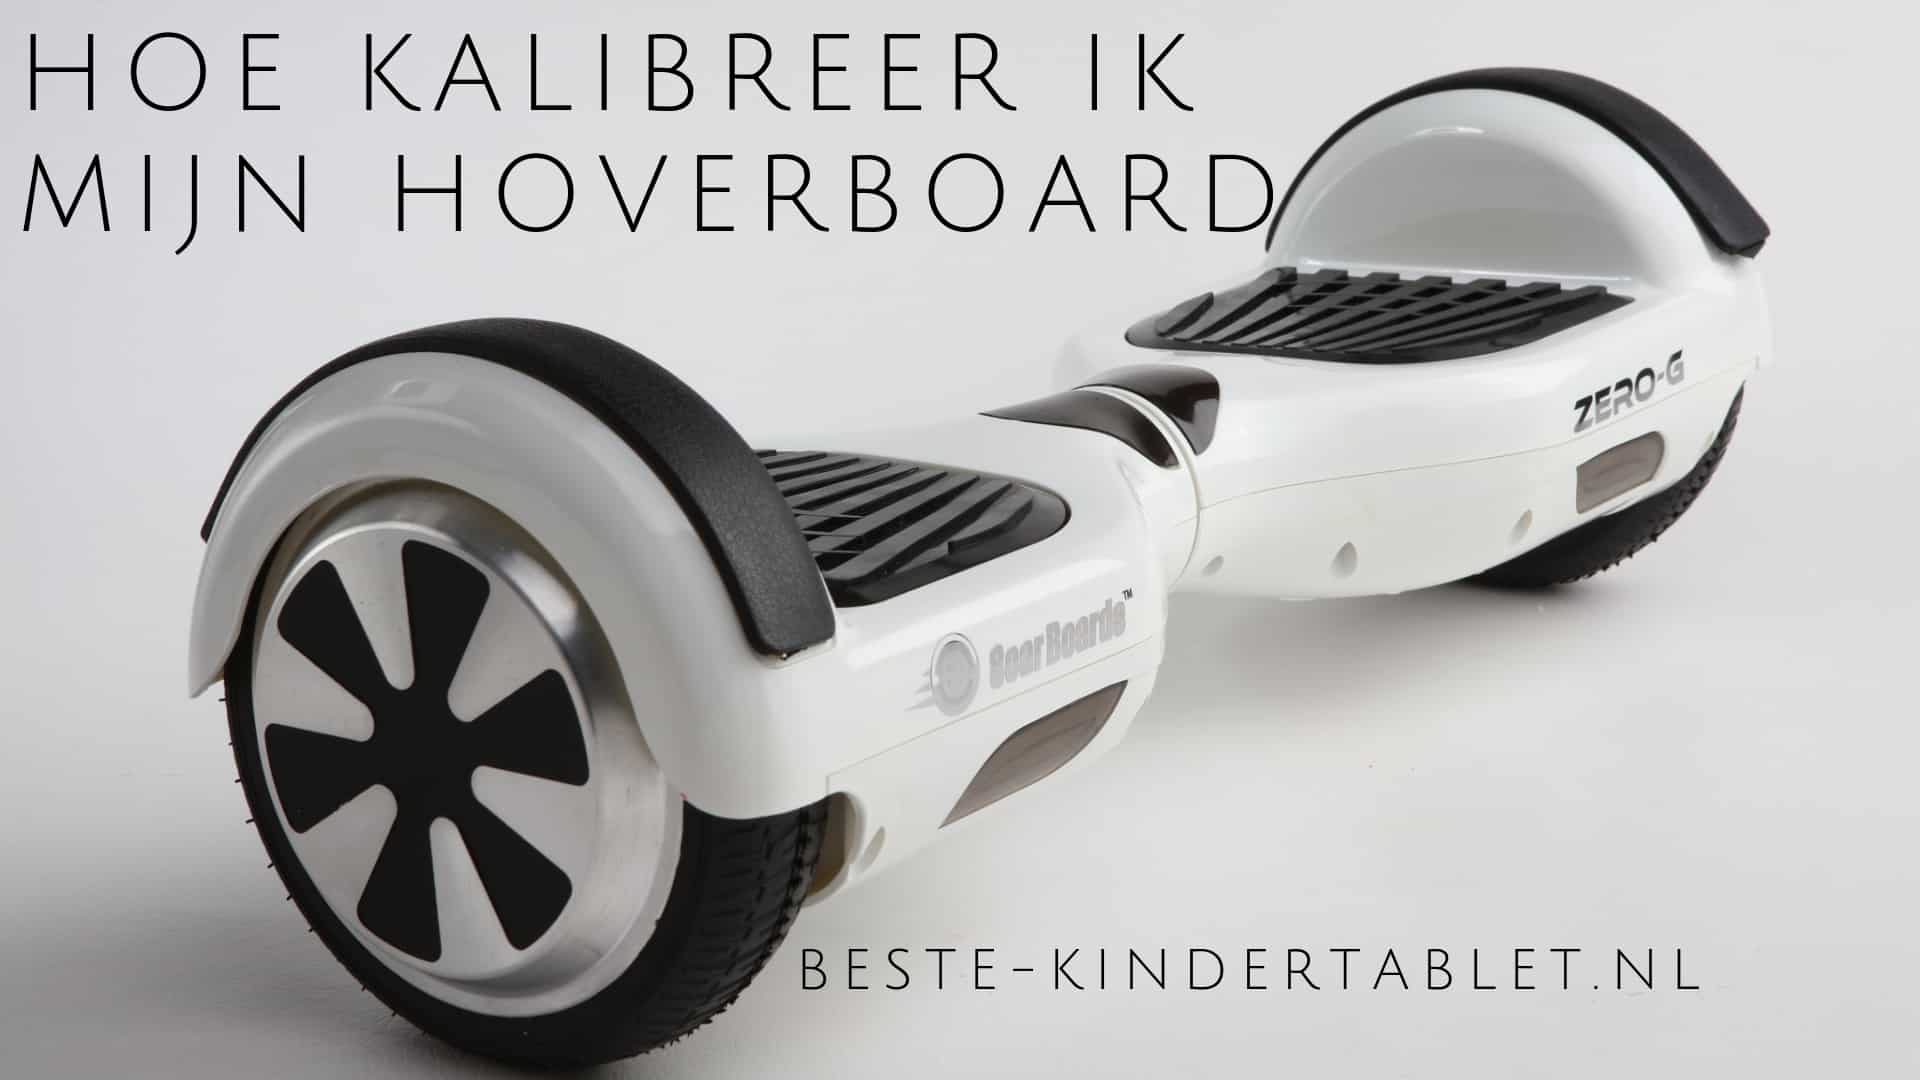 Calibrate hoverboard in 5 minutes with these easy steps